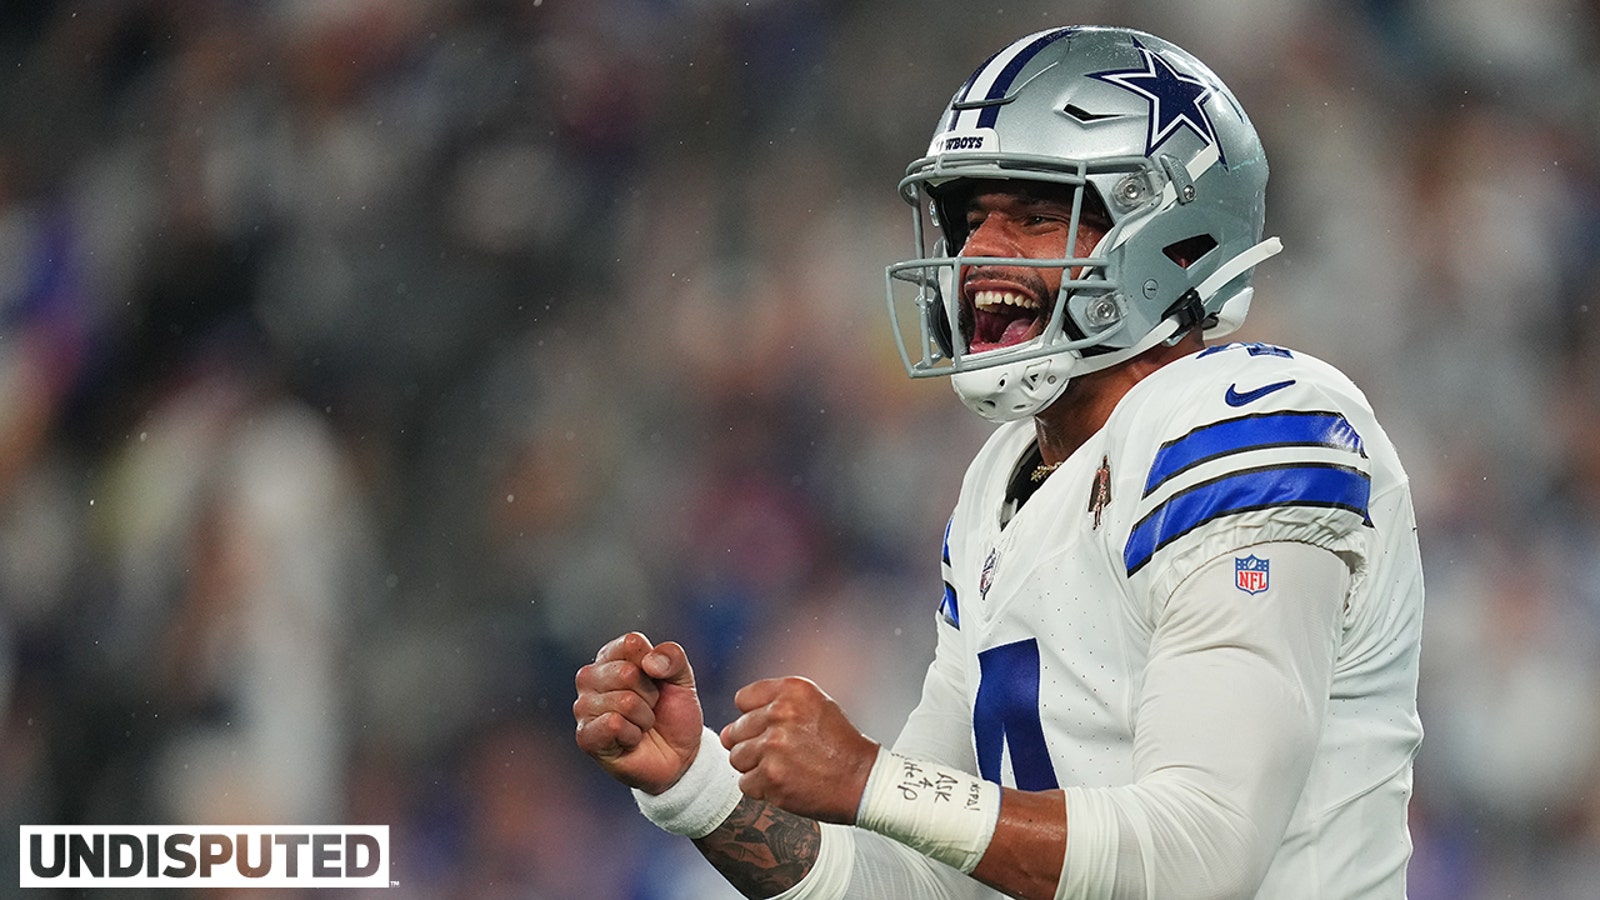 Cowboys top NFL Power Ranking after dominant Week 1 performance